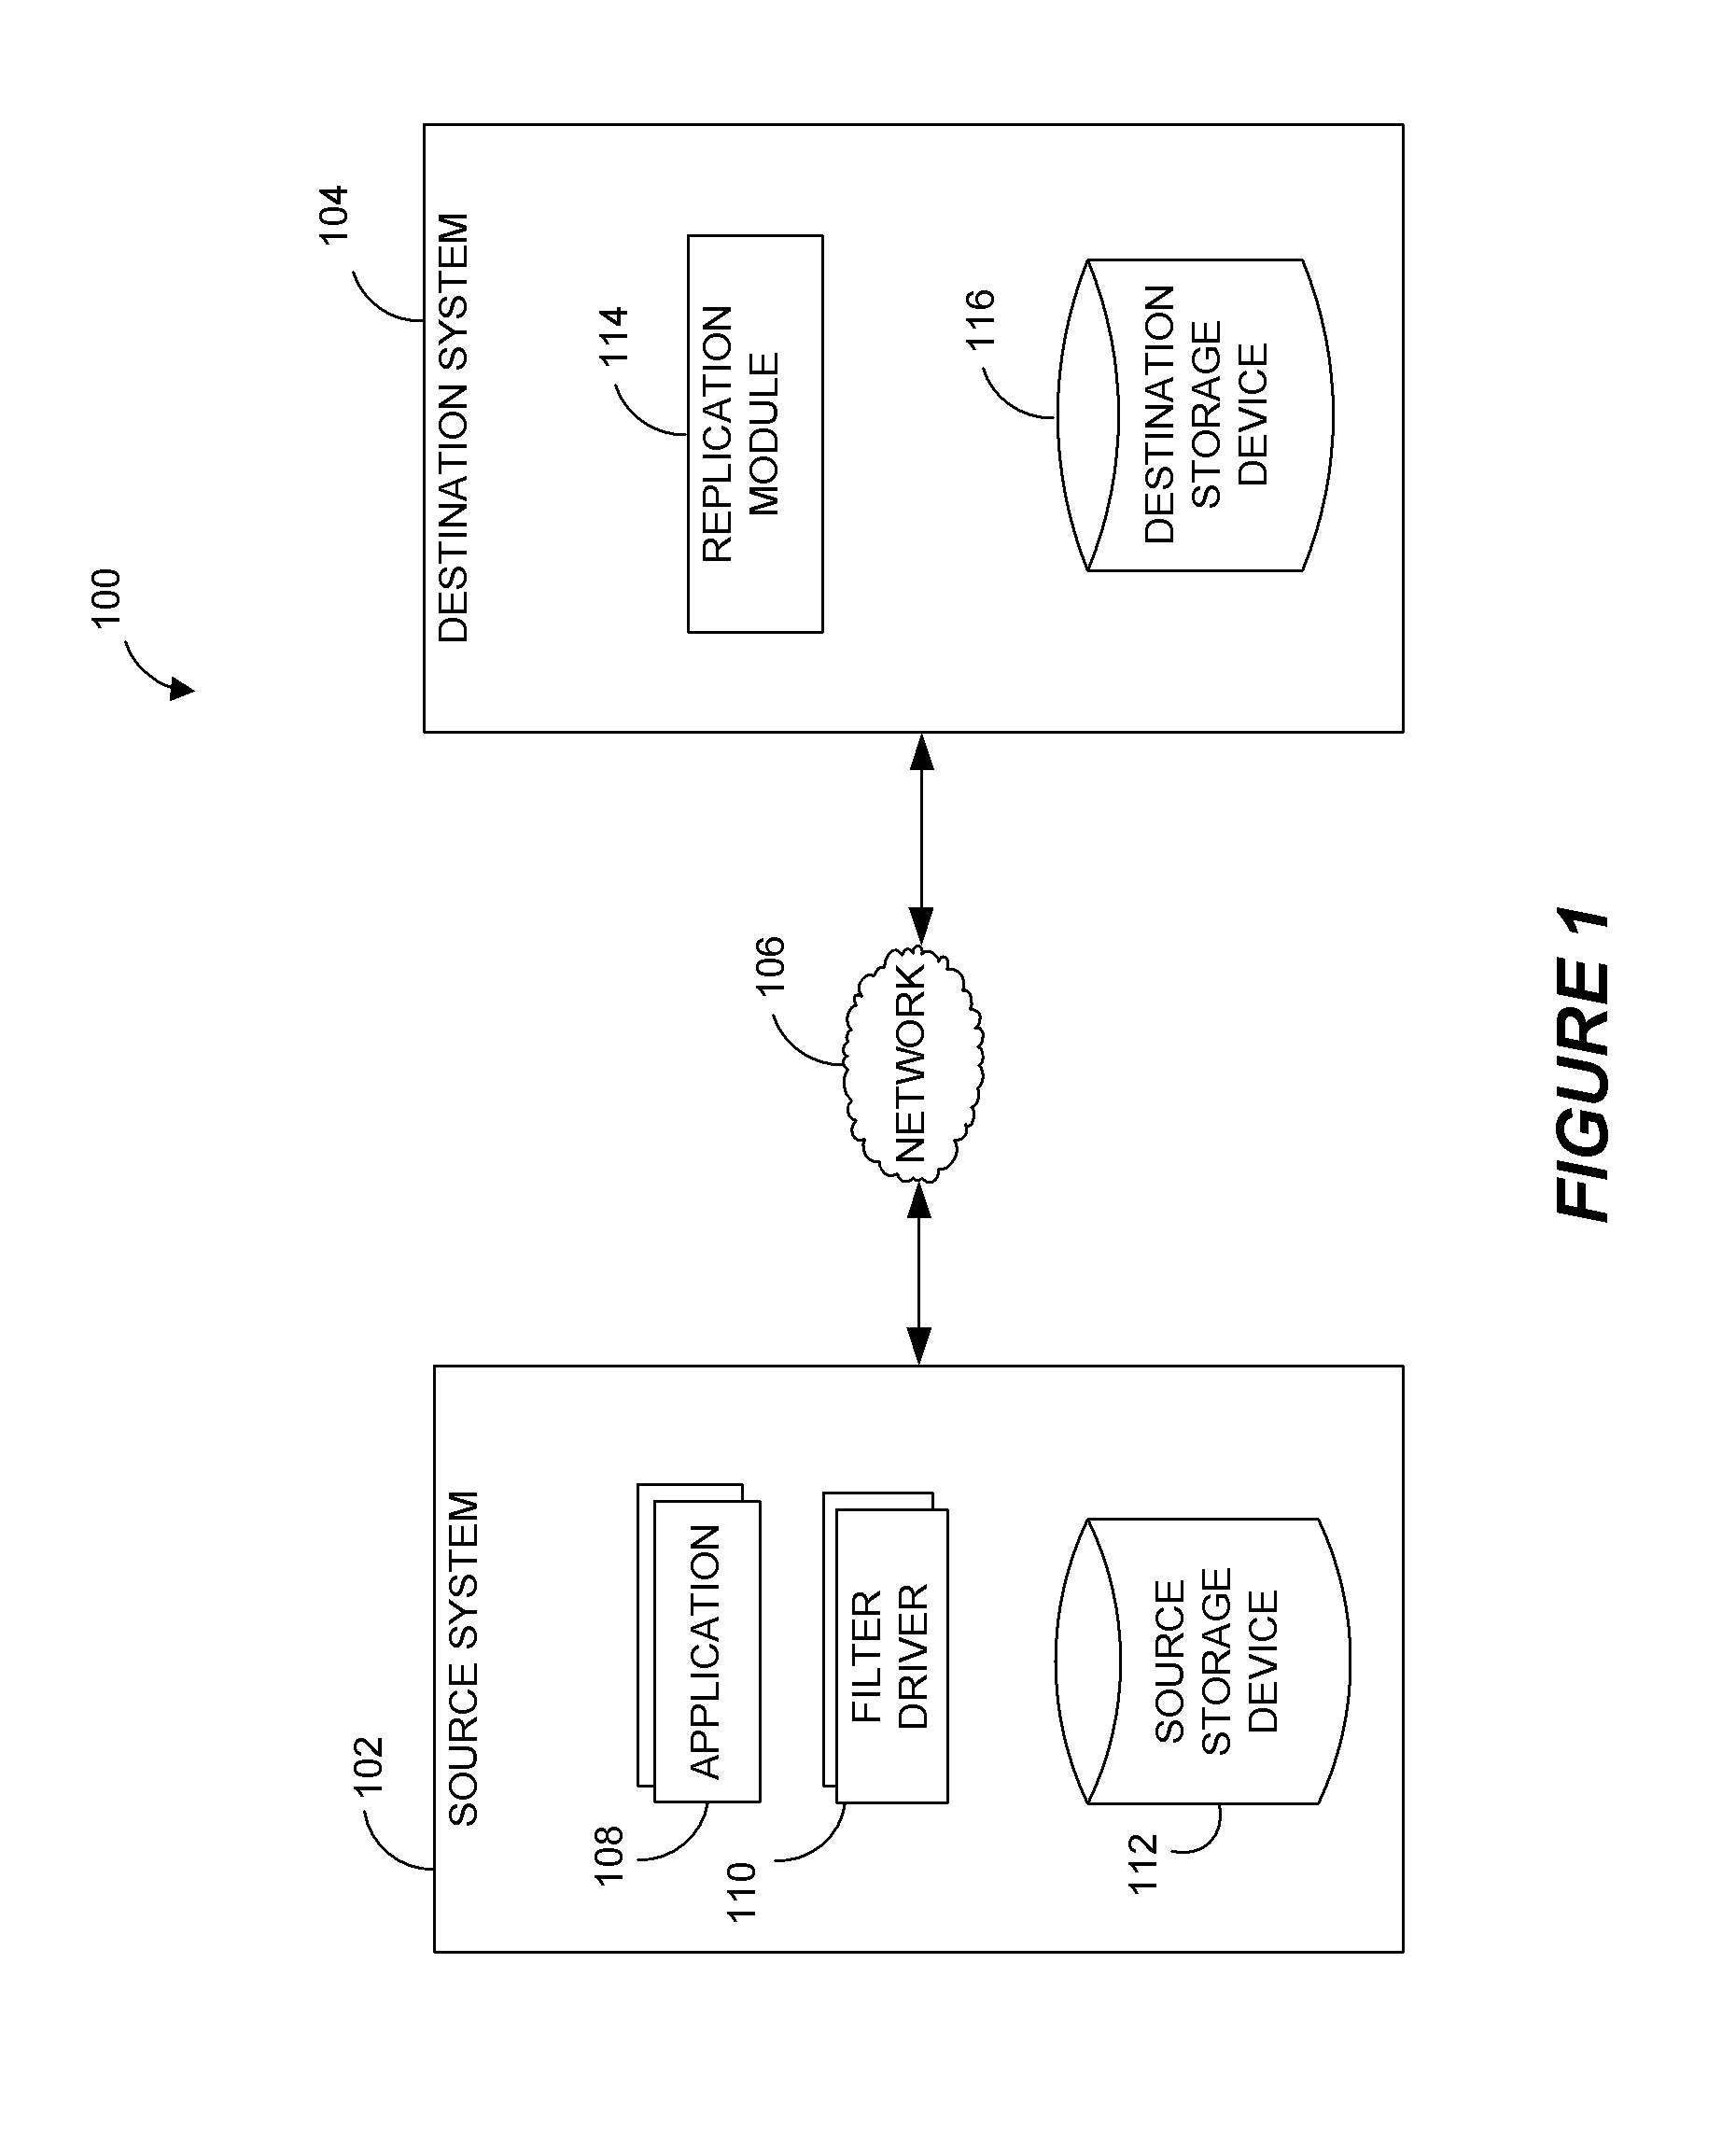 Systems and methods for performing data replication